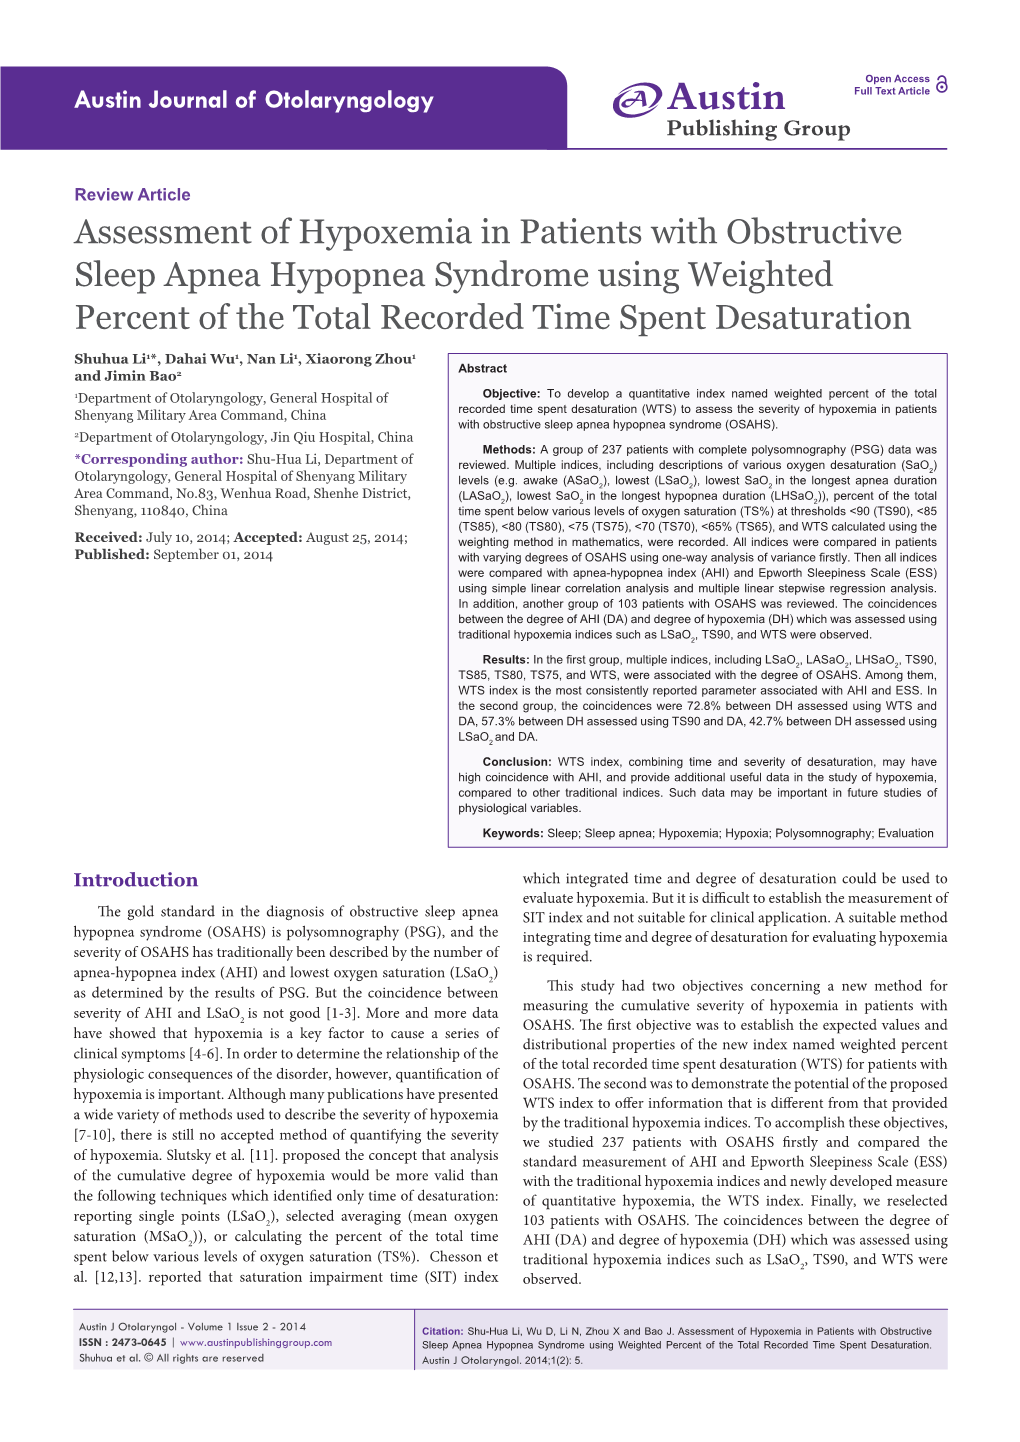 Assessment of Hypoxemia in Patients with Obstructive Sleep Apnea Hypopnea Syndrome Using Weighted Percent of the Total Recorded Time Spent Desaturation